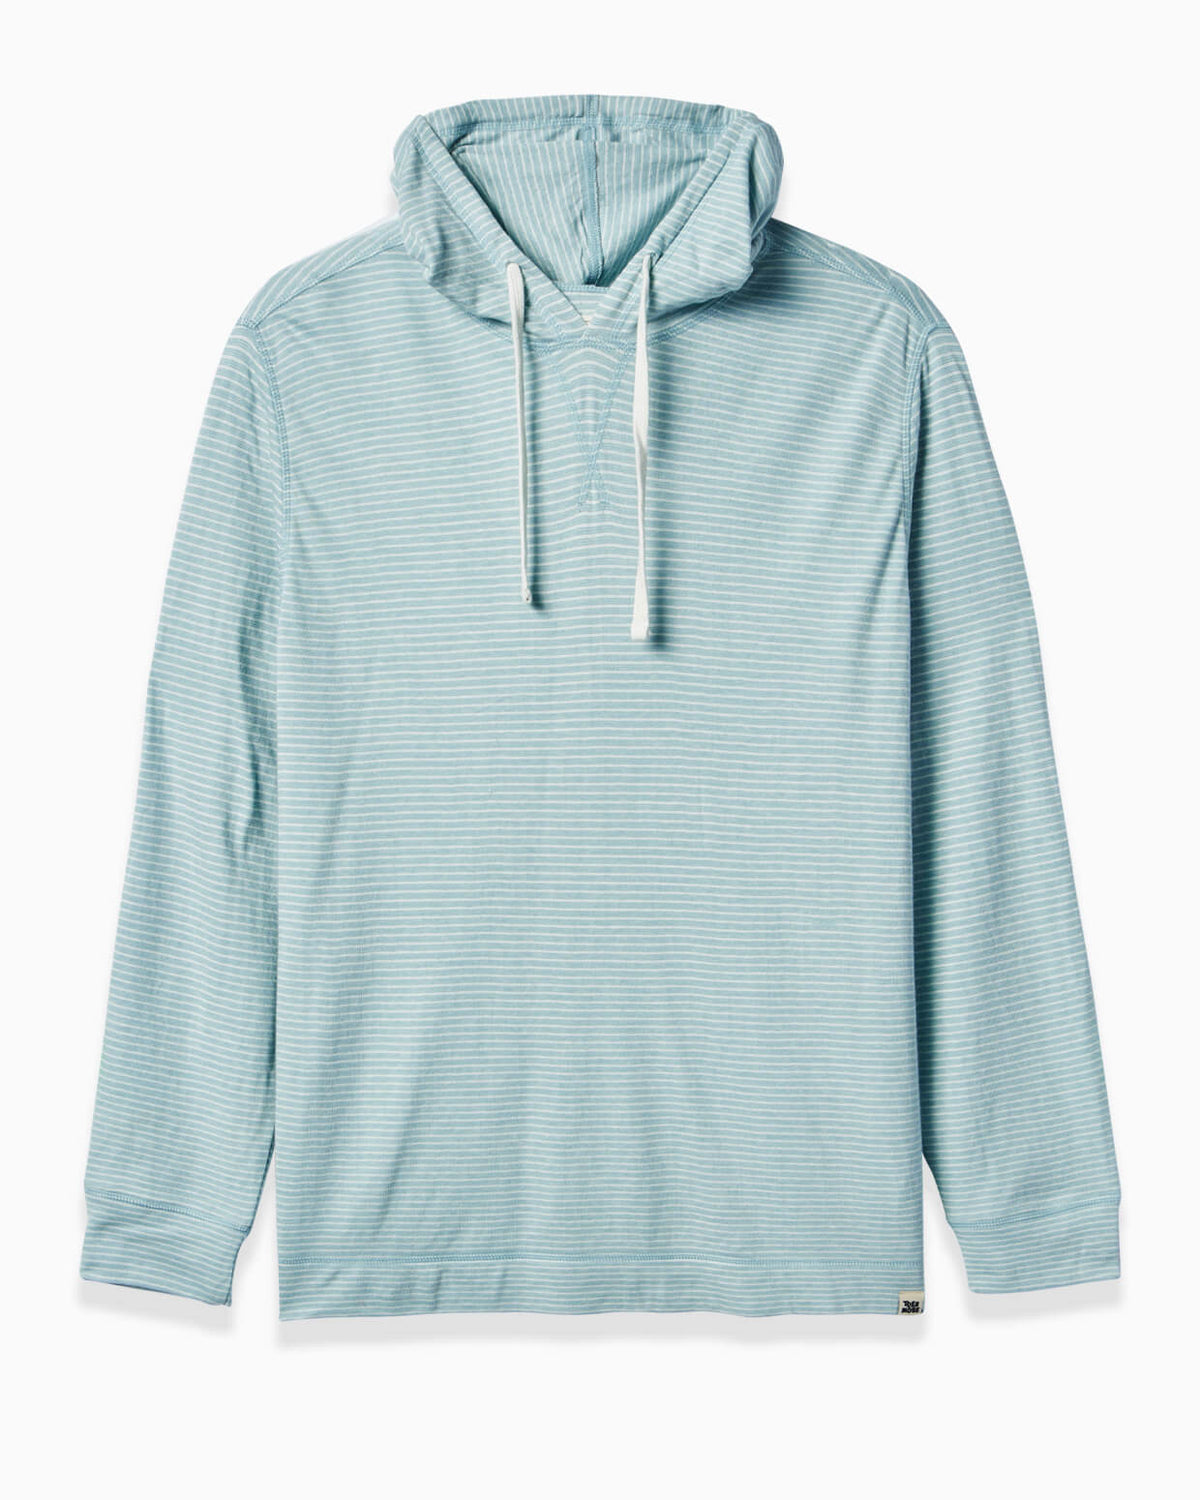 Surf Club Hoodie | Sixty One Collection flat #color_seafoam stripe